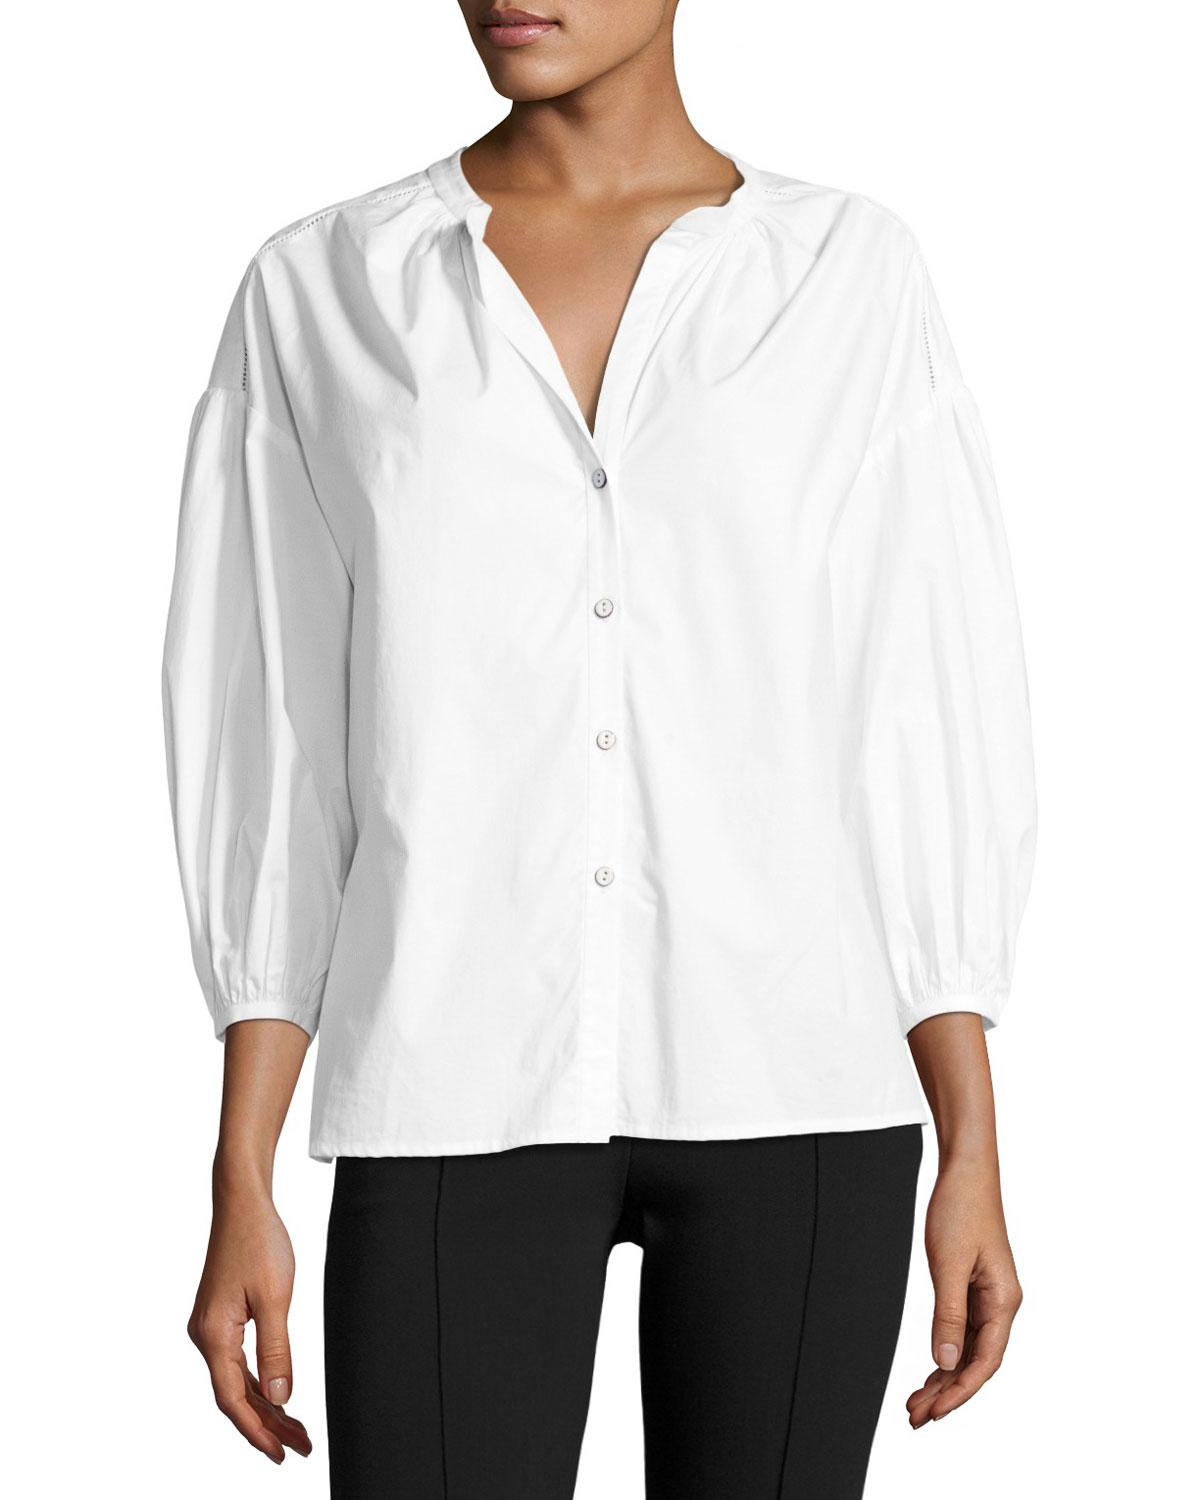 Lyst - Saloni Bette Puff-sleeve Cotton Shirt in White